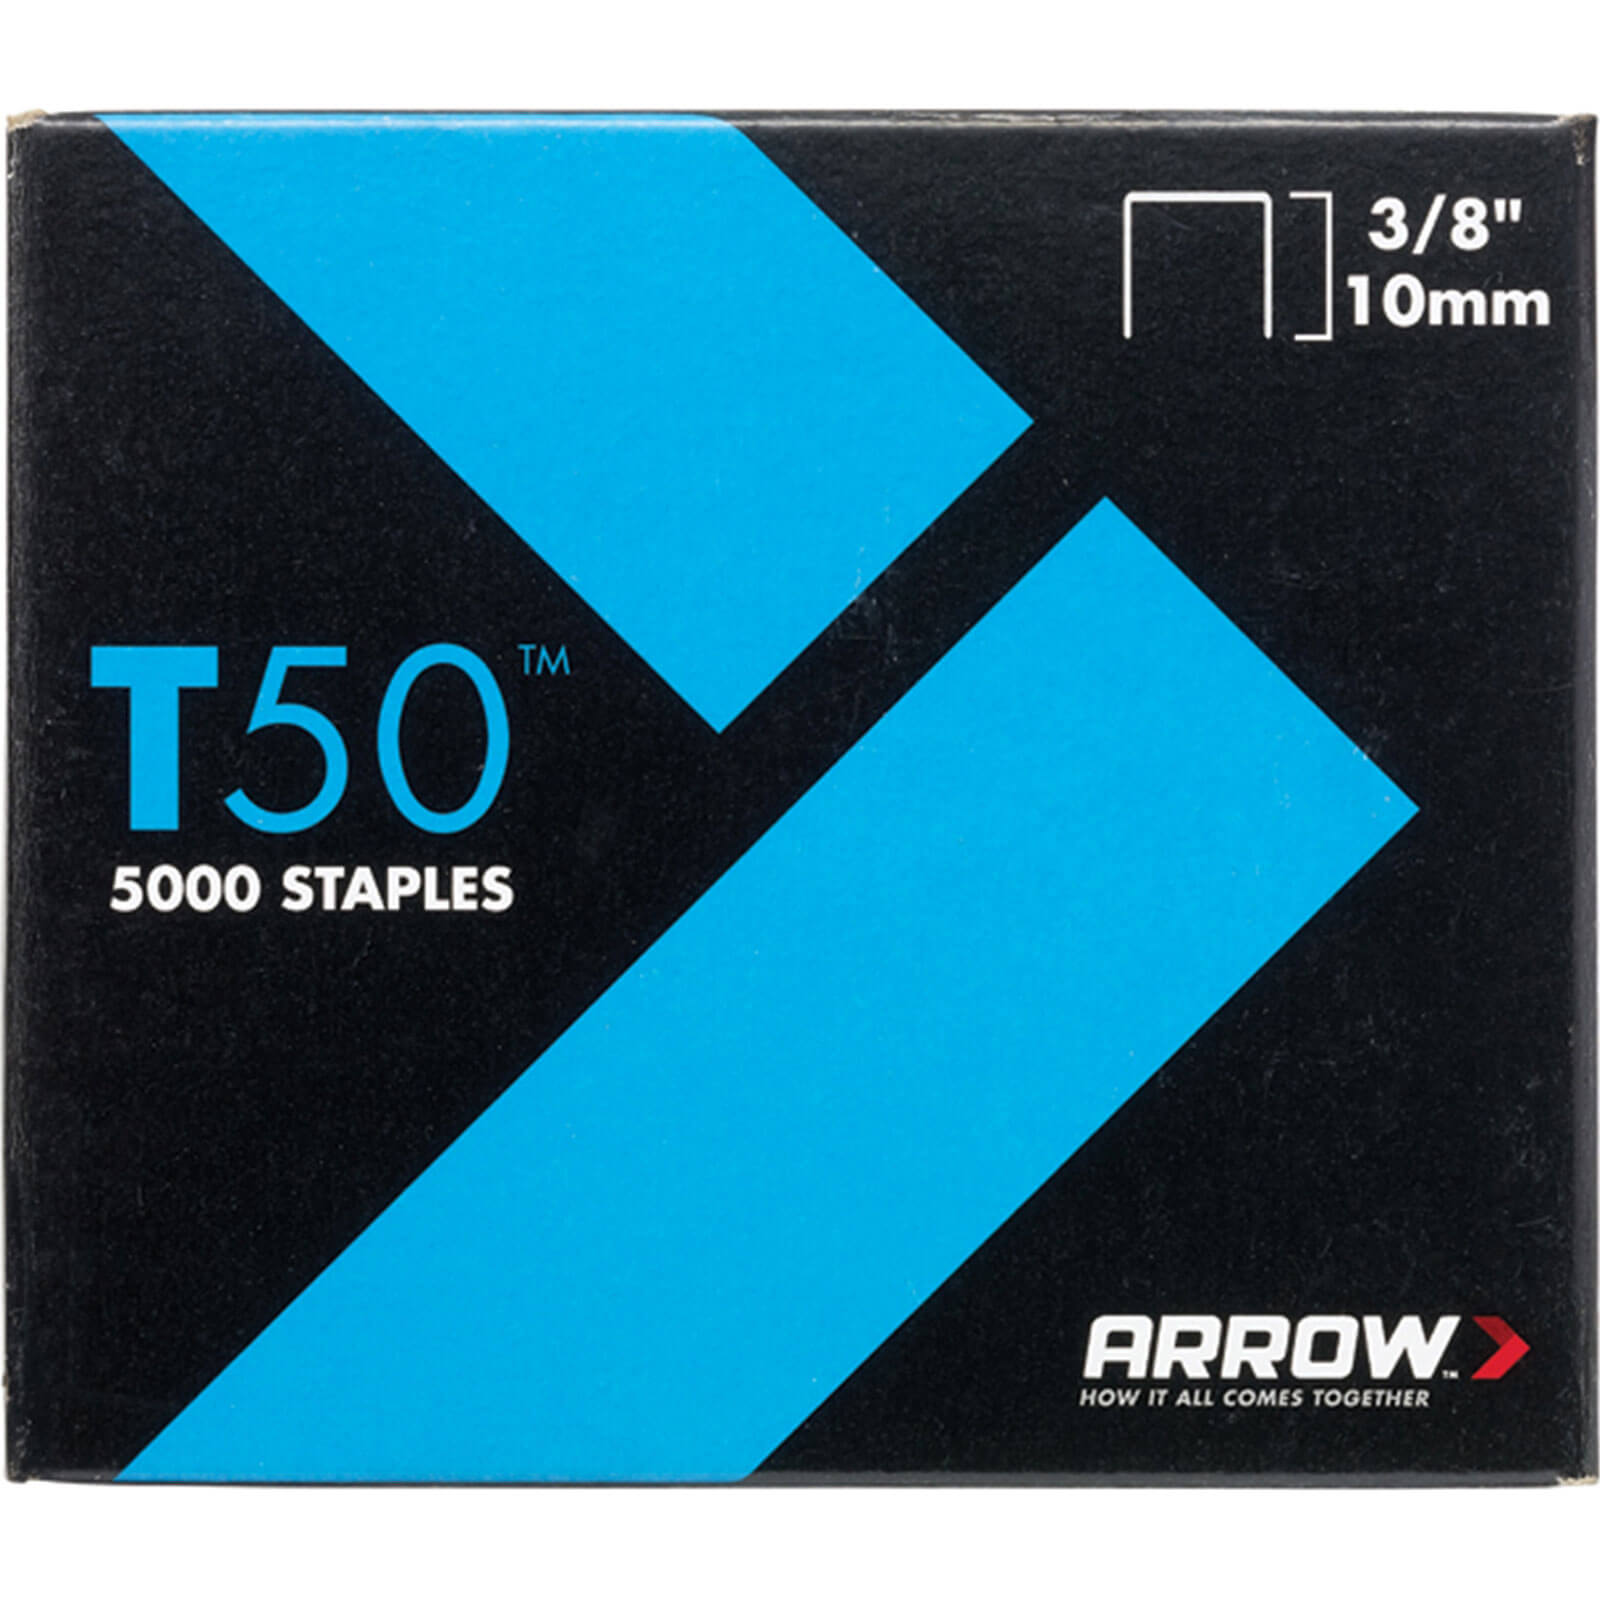 Arrow T50 Staples 10mm / 3/8" Pack of 1250